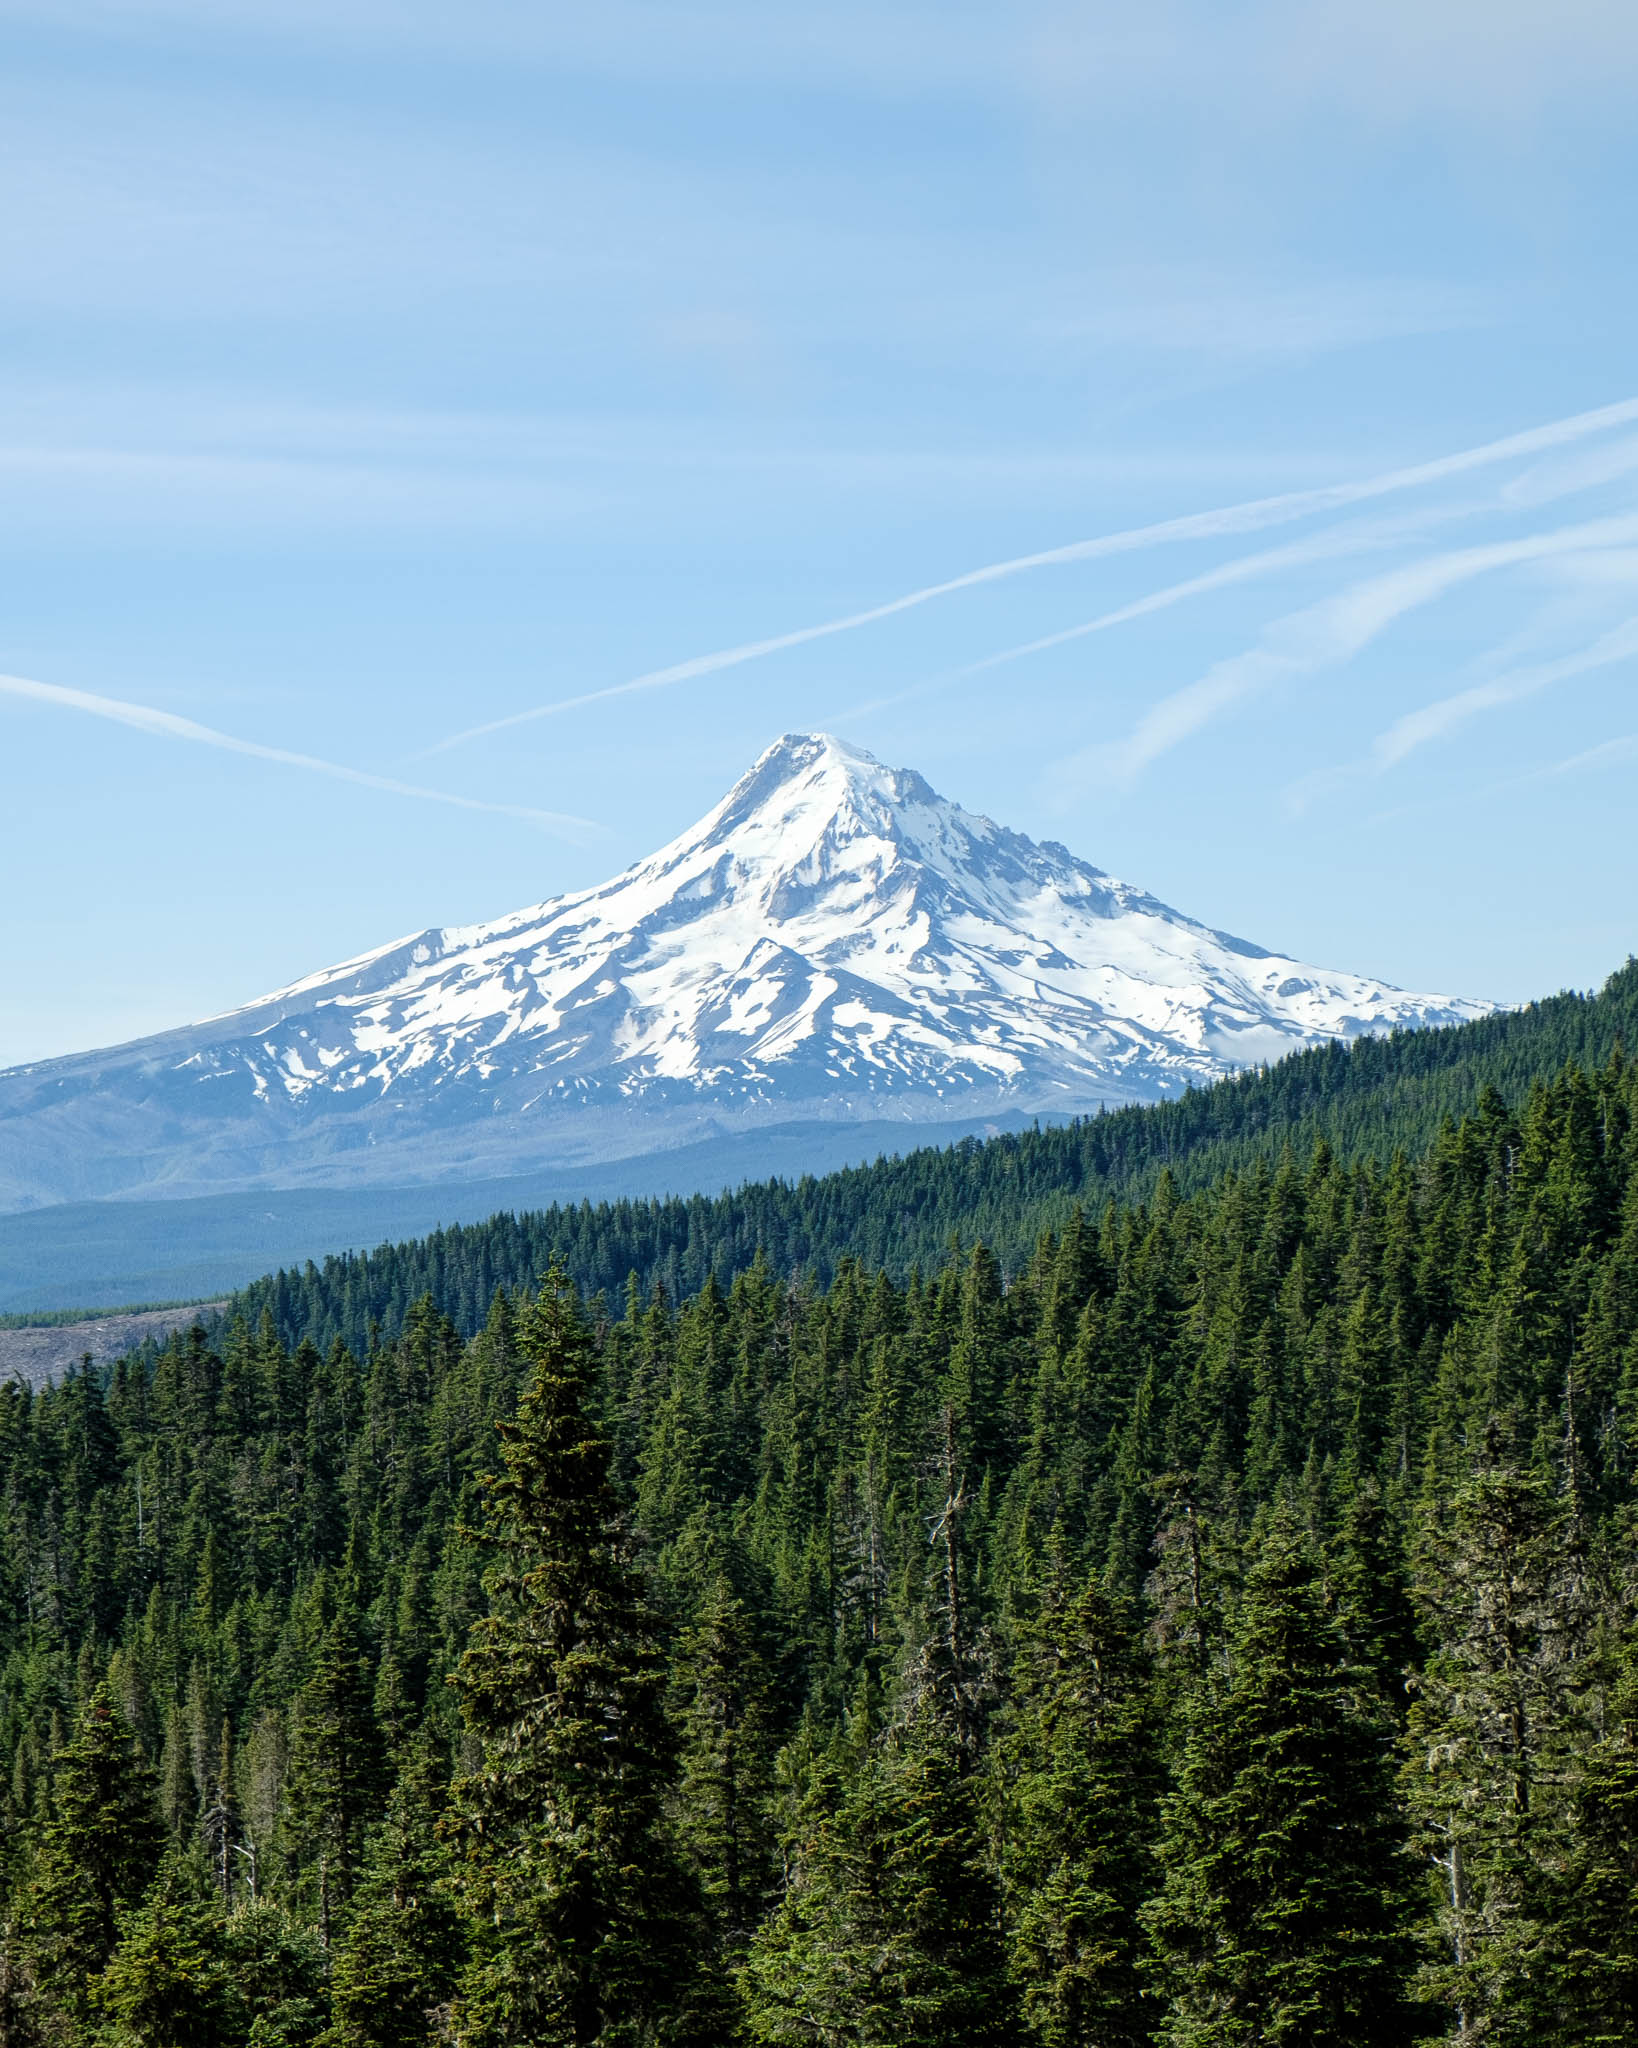 Mt. Hood rises in the distance, framed by contrails in the sky and thick forest in the foreground.